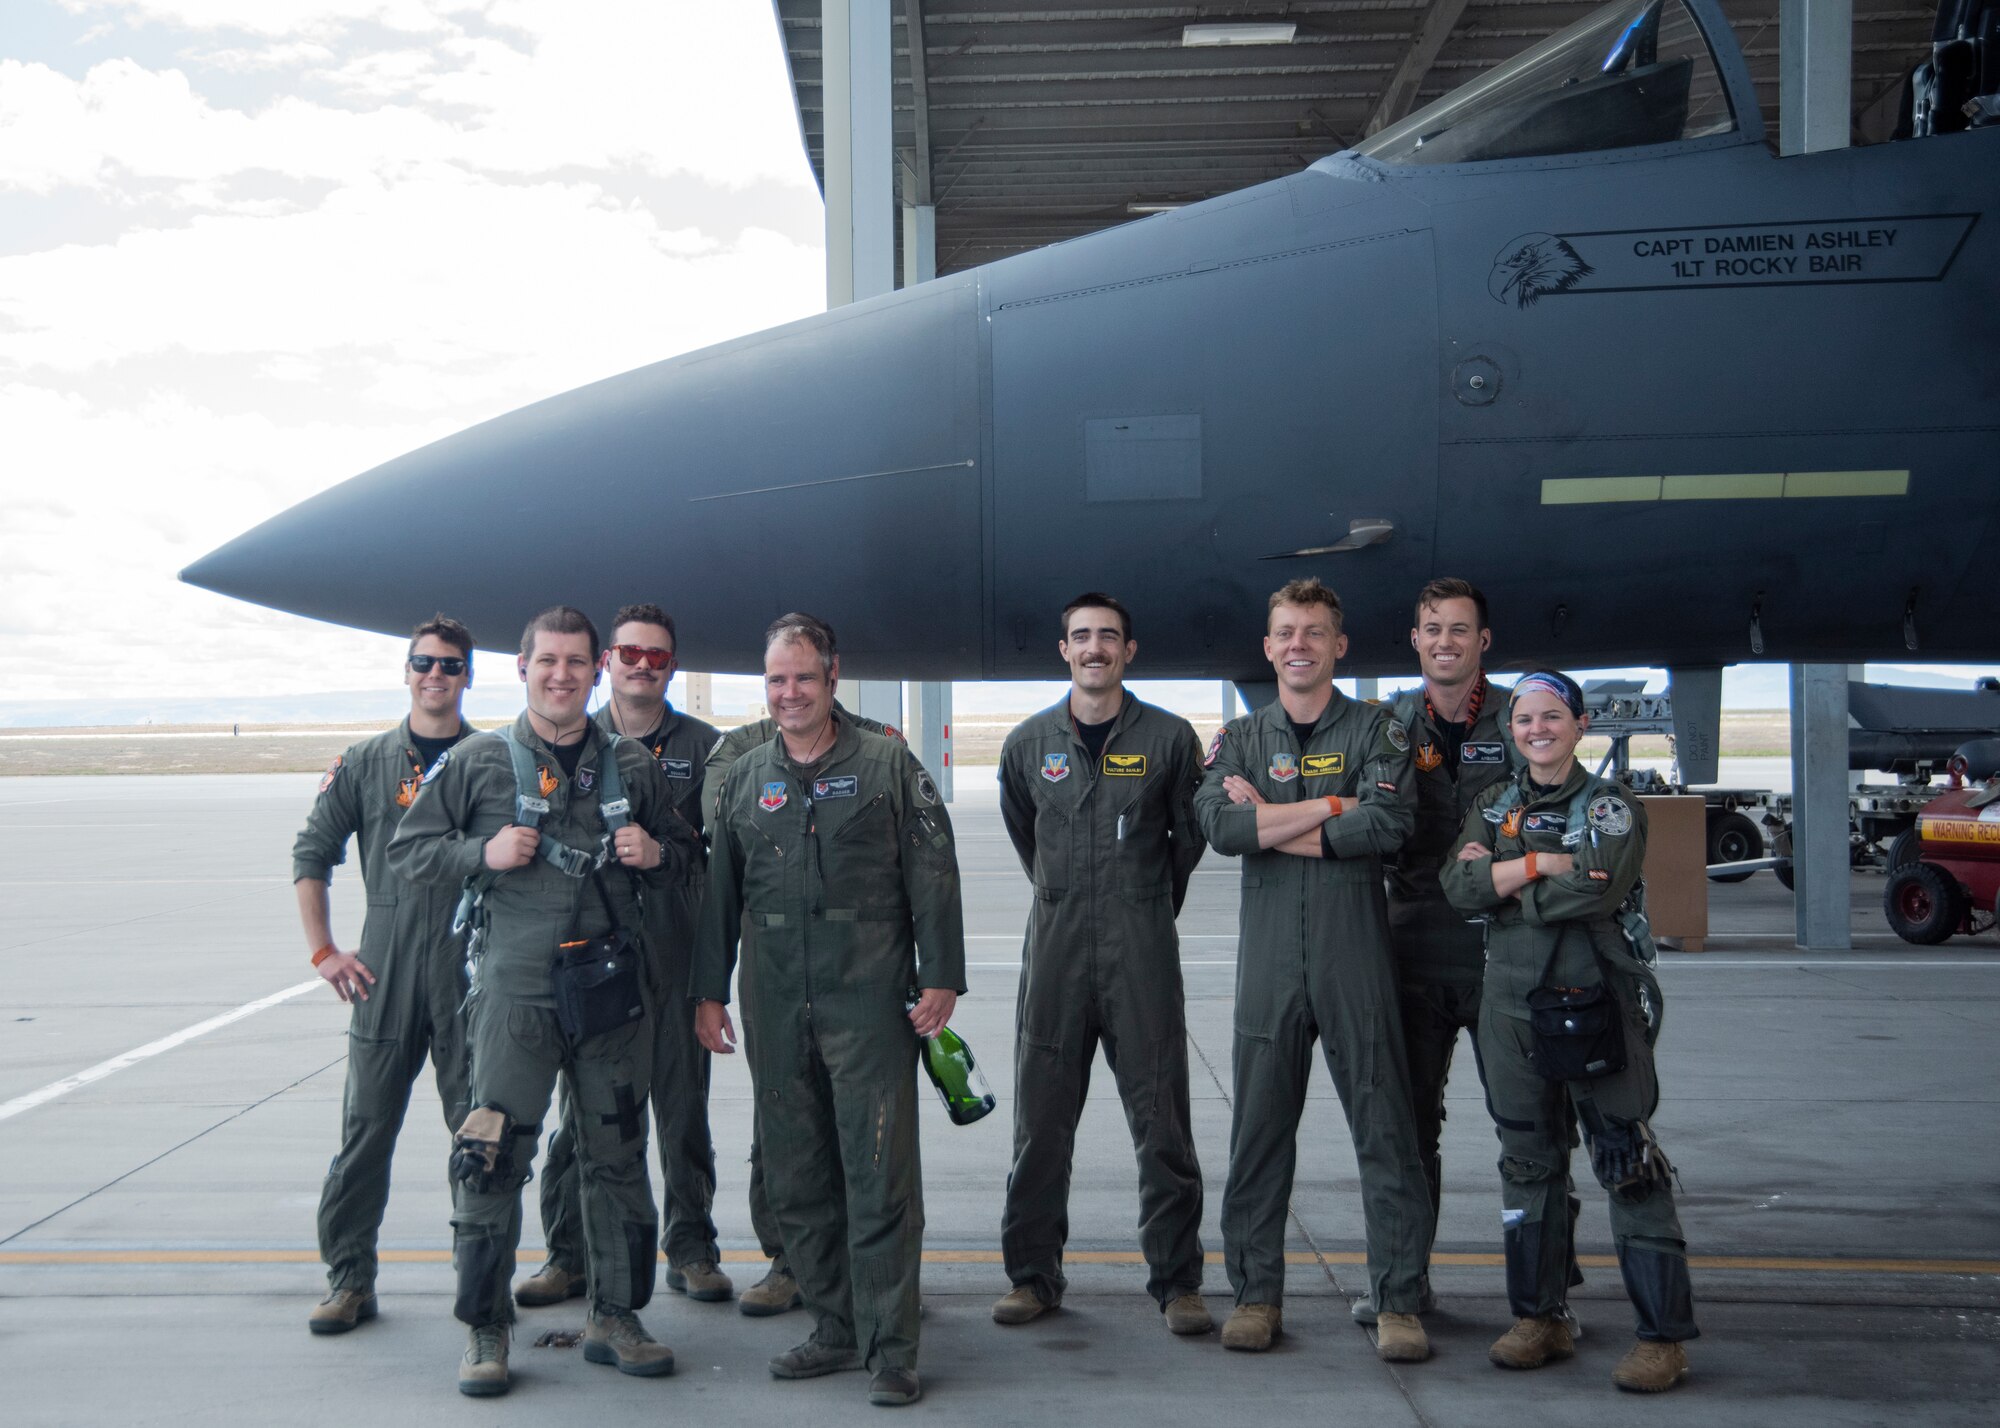 U.S. Air Force Lt. Col. Aaron C. “Badger” Lapp, 366th Fighter Wing director of operations and plans, poses with his fellow pilots, May 15, 2020, on Mountain Home Air Force Base, Idaho. During his time in service, Lapp has flown five different types of aircraft such as the T-38 Talon, T-37 Tweet, F-15E Strike Eagle, F-15SG Strike Eagle and F/A-18 Super Hornet. (U.S. Air Force photo by Airman 1st Class Akeem K. Campbell)